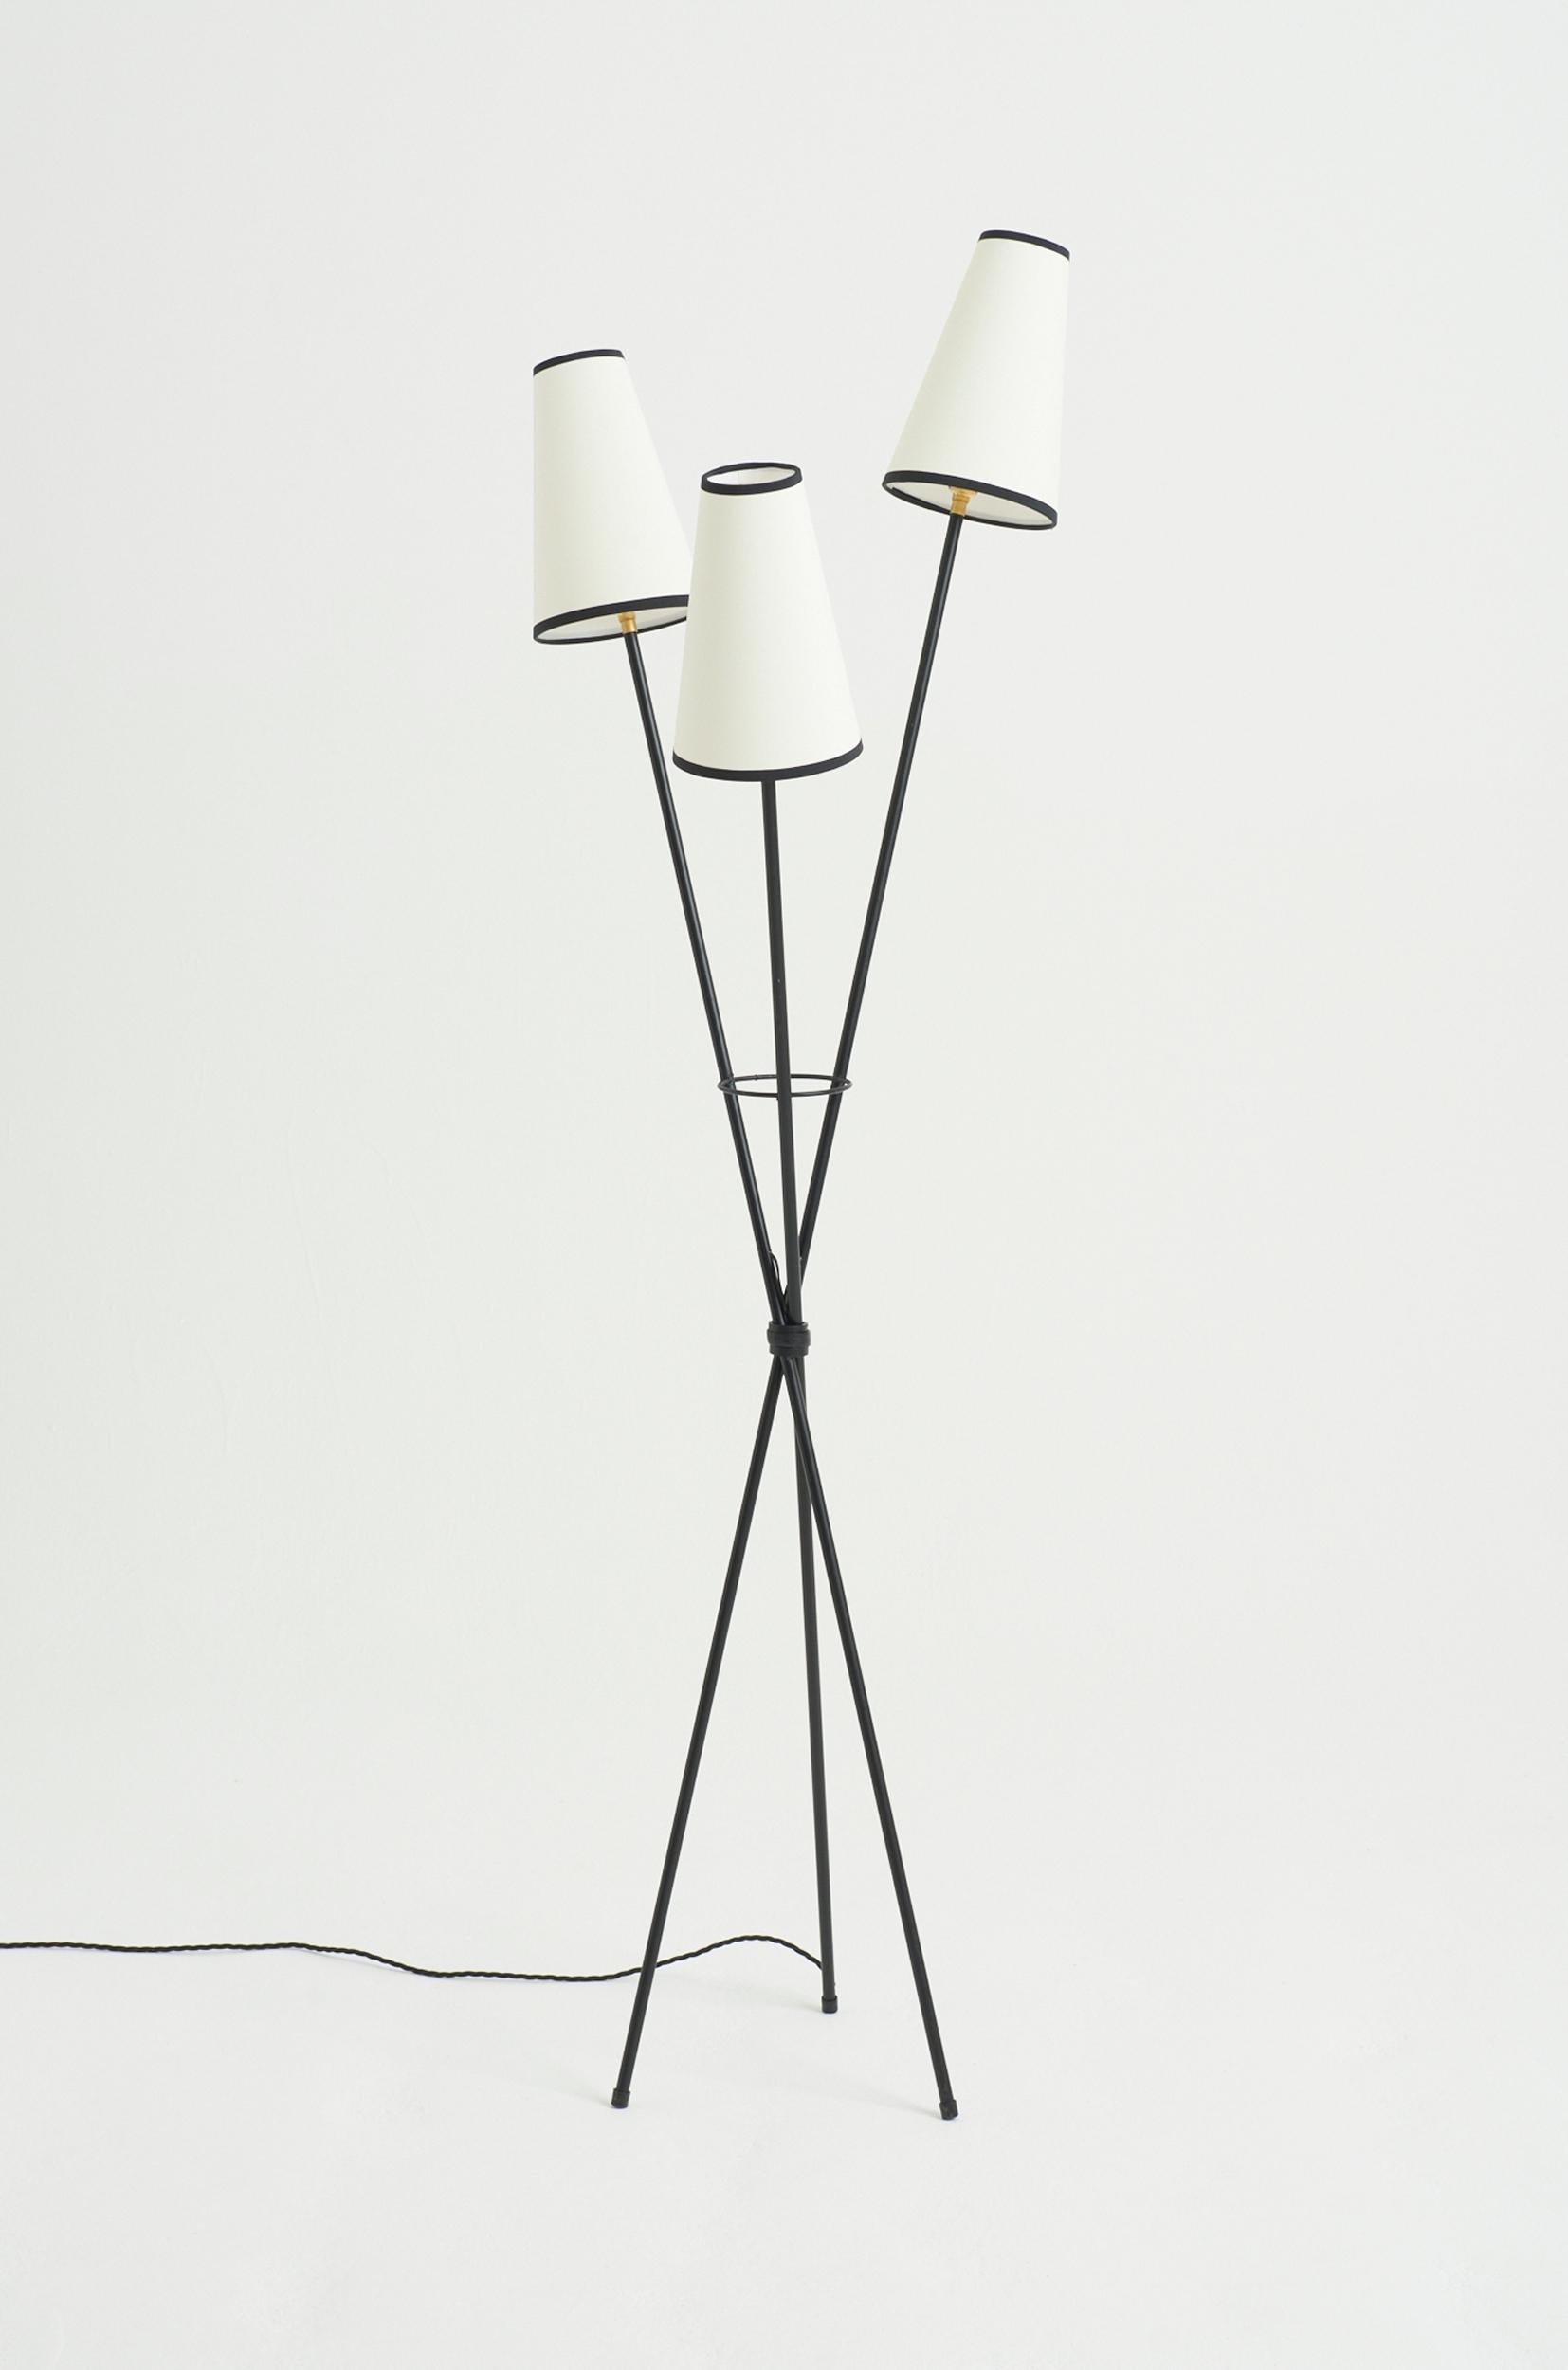 A three armed black enamelled iron floor lamp, with bespoke shades
France, mid 20th Century
159 cm high by 46 cm wide by 46 cm depth